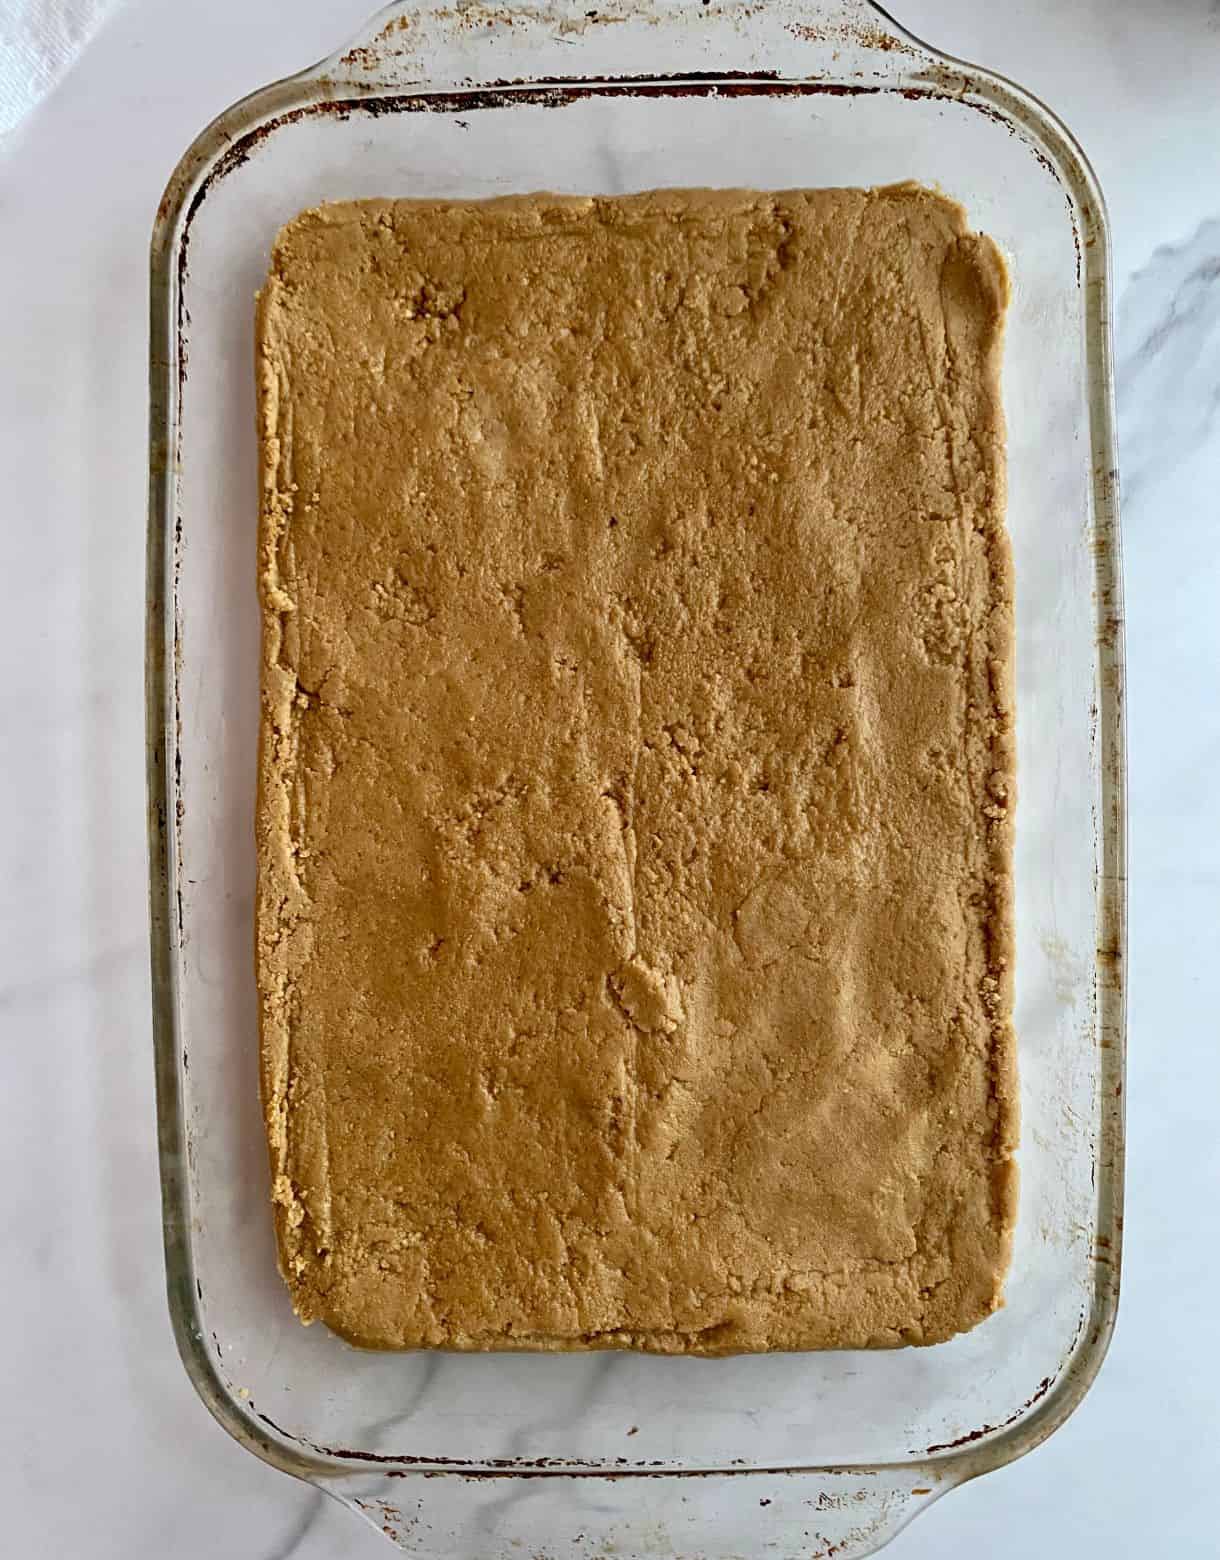 A pan with the peanut butter dough spread flat for No-Bake Chocolate Peanut Butter Bars.